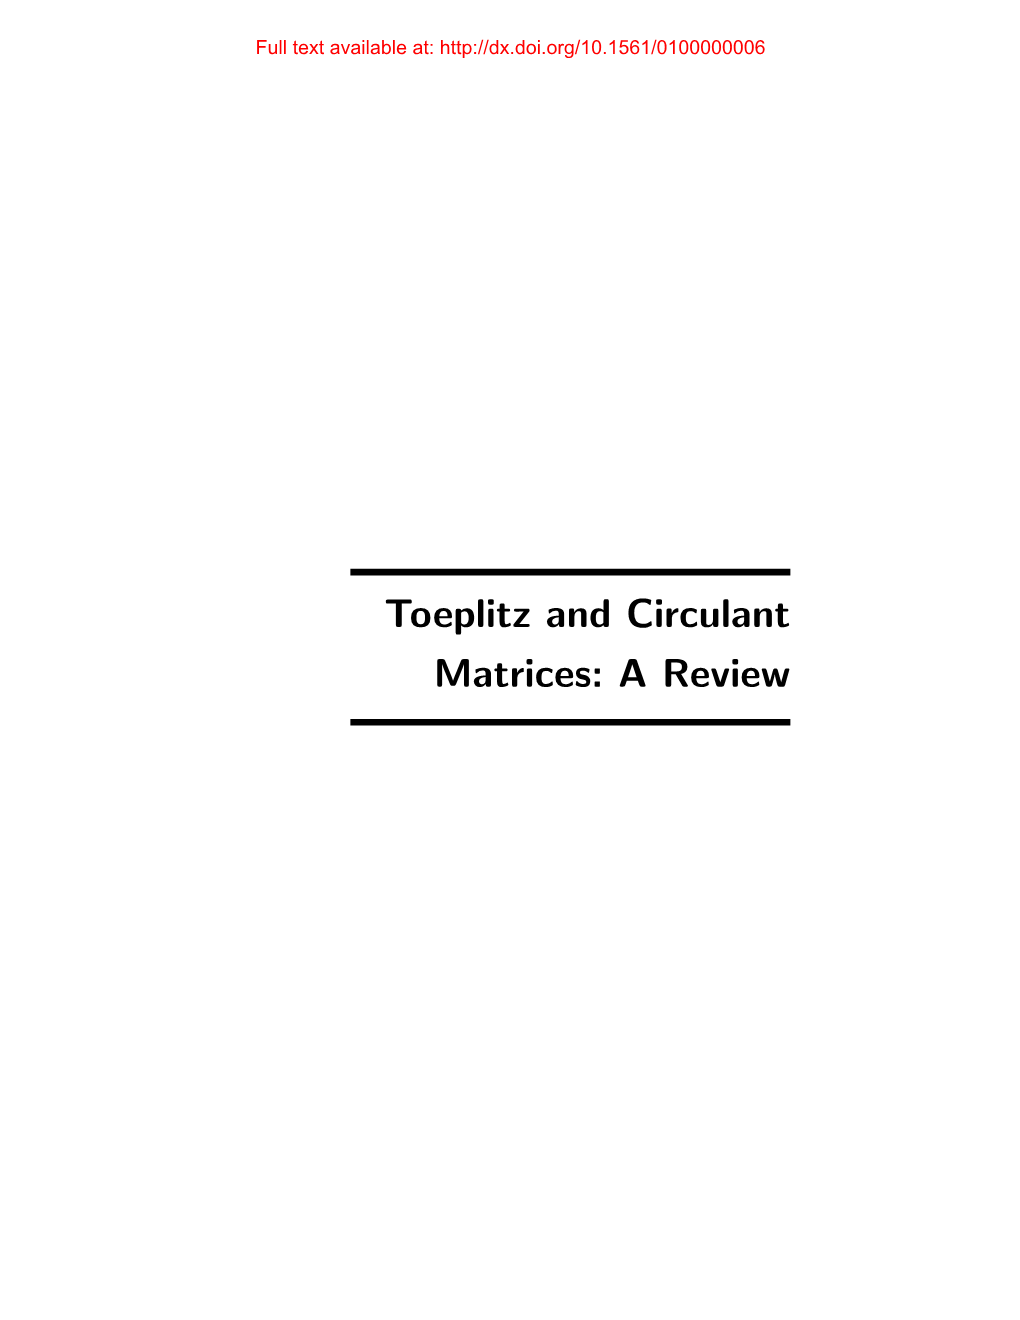 Toeplitz and Circulant Matrices: a Review Full Text Available At